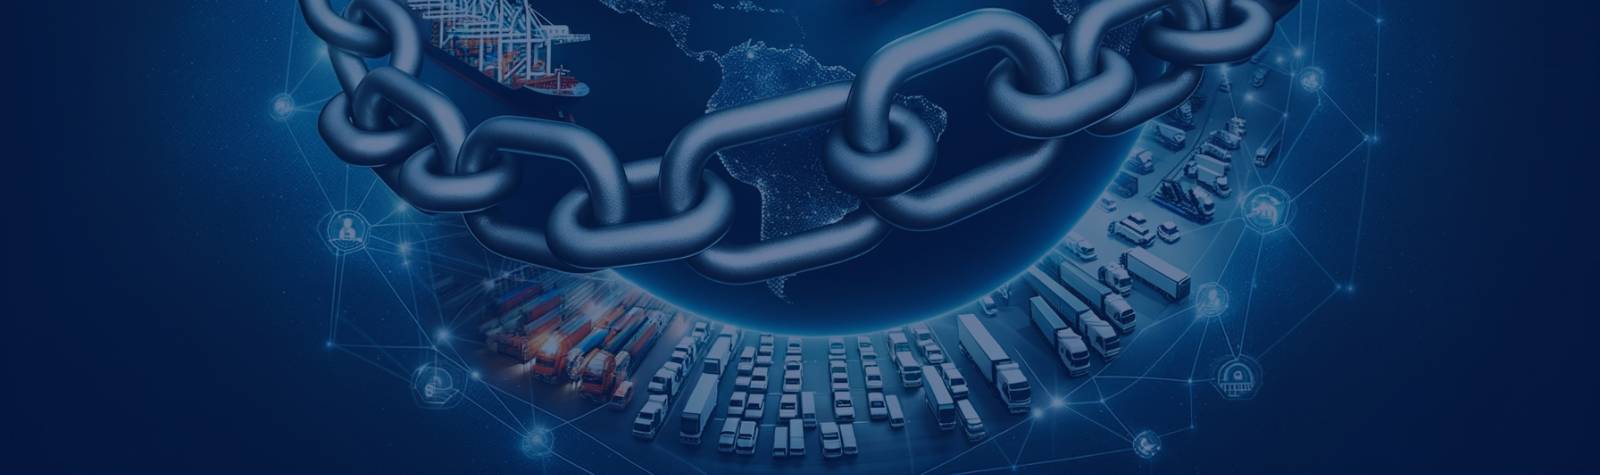 Global Supply Chain Challenges in the Automotive Sector 